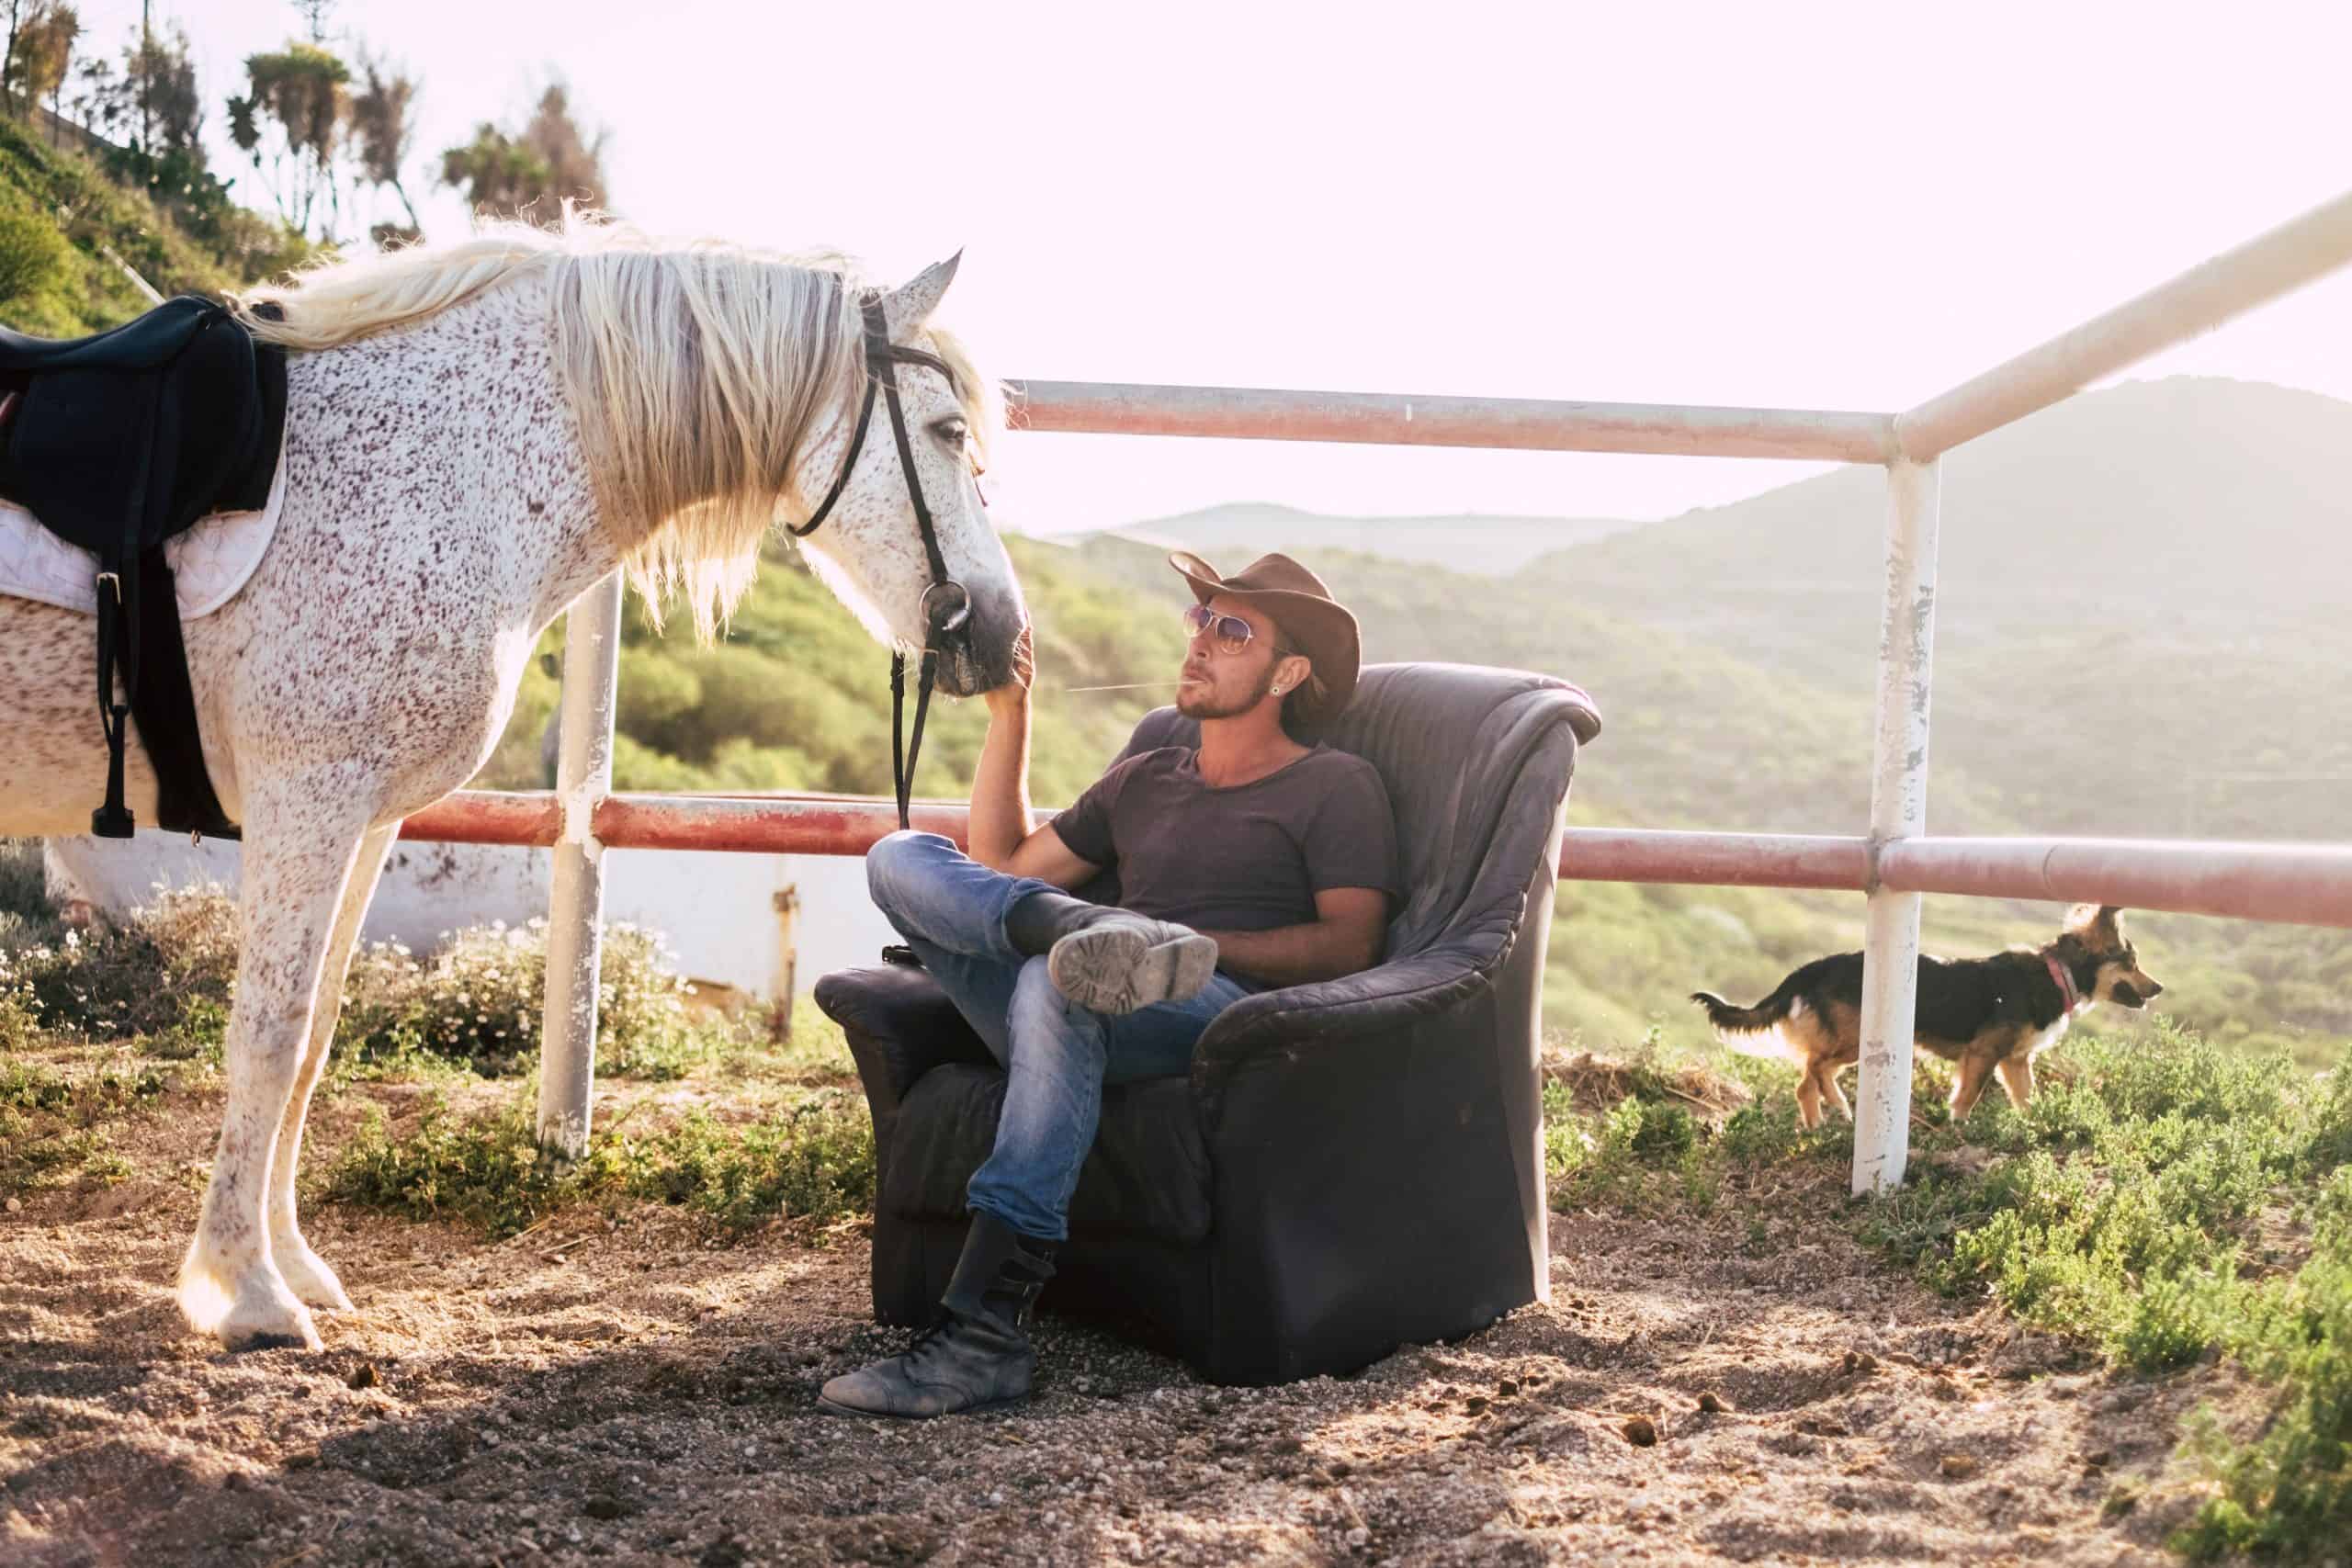 caucasian man enjoy his horse resting on a seats outdoor in the countryside. alternative lifestyle in contact with animals and nature. dog in the background